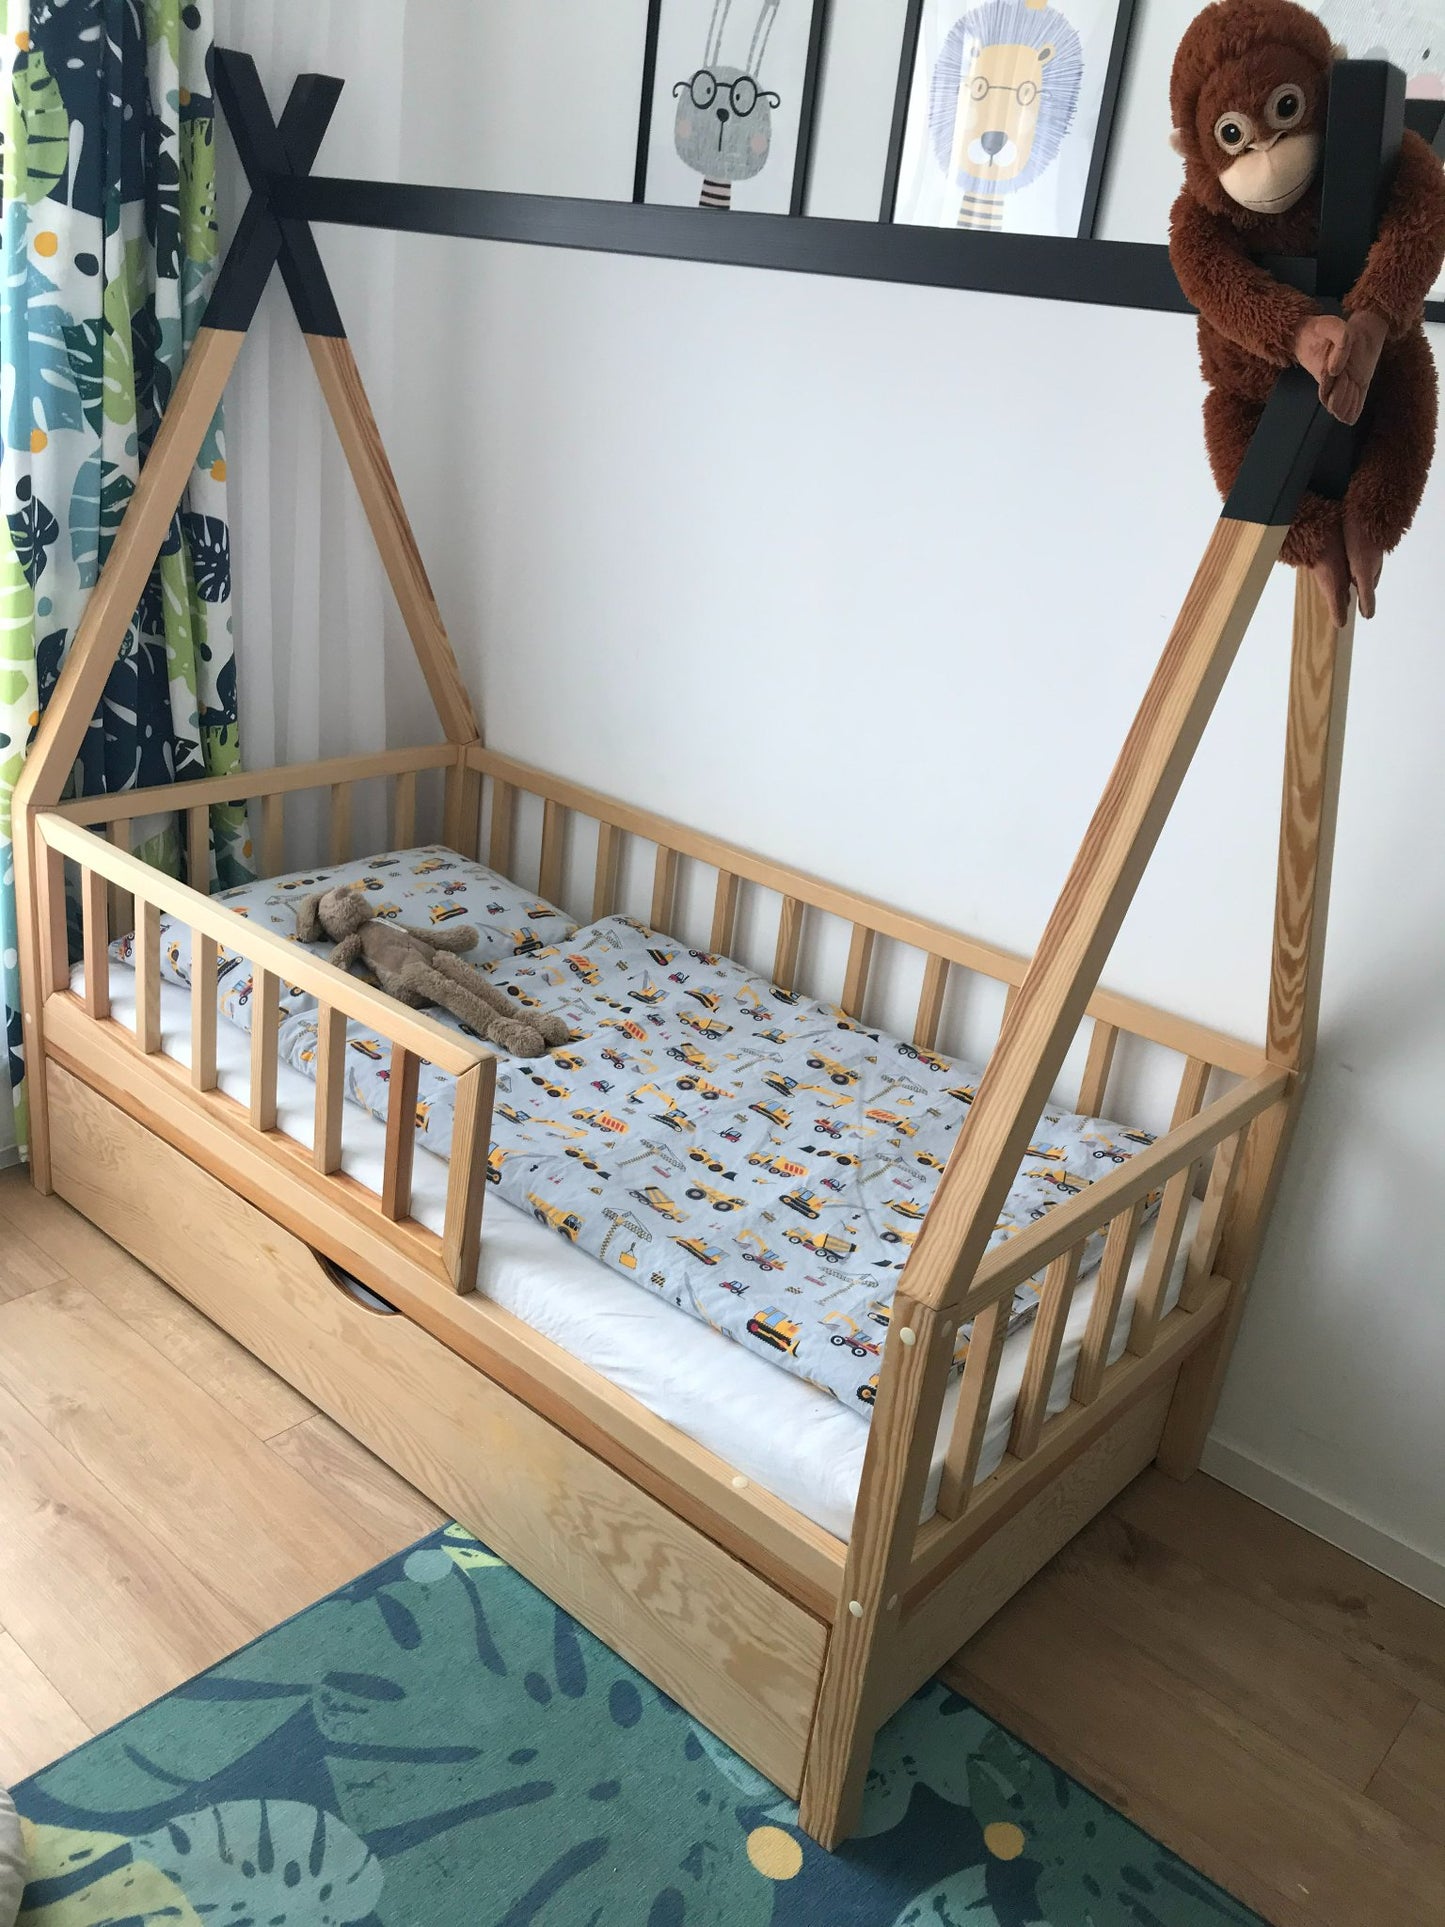 Tipi Benny bed with drawer